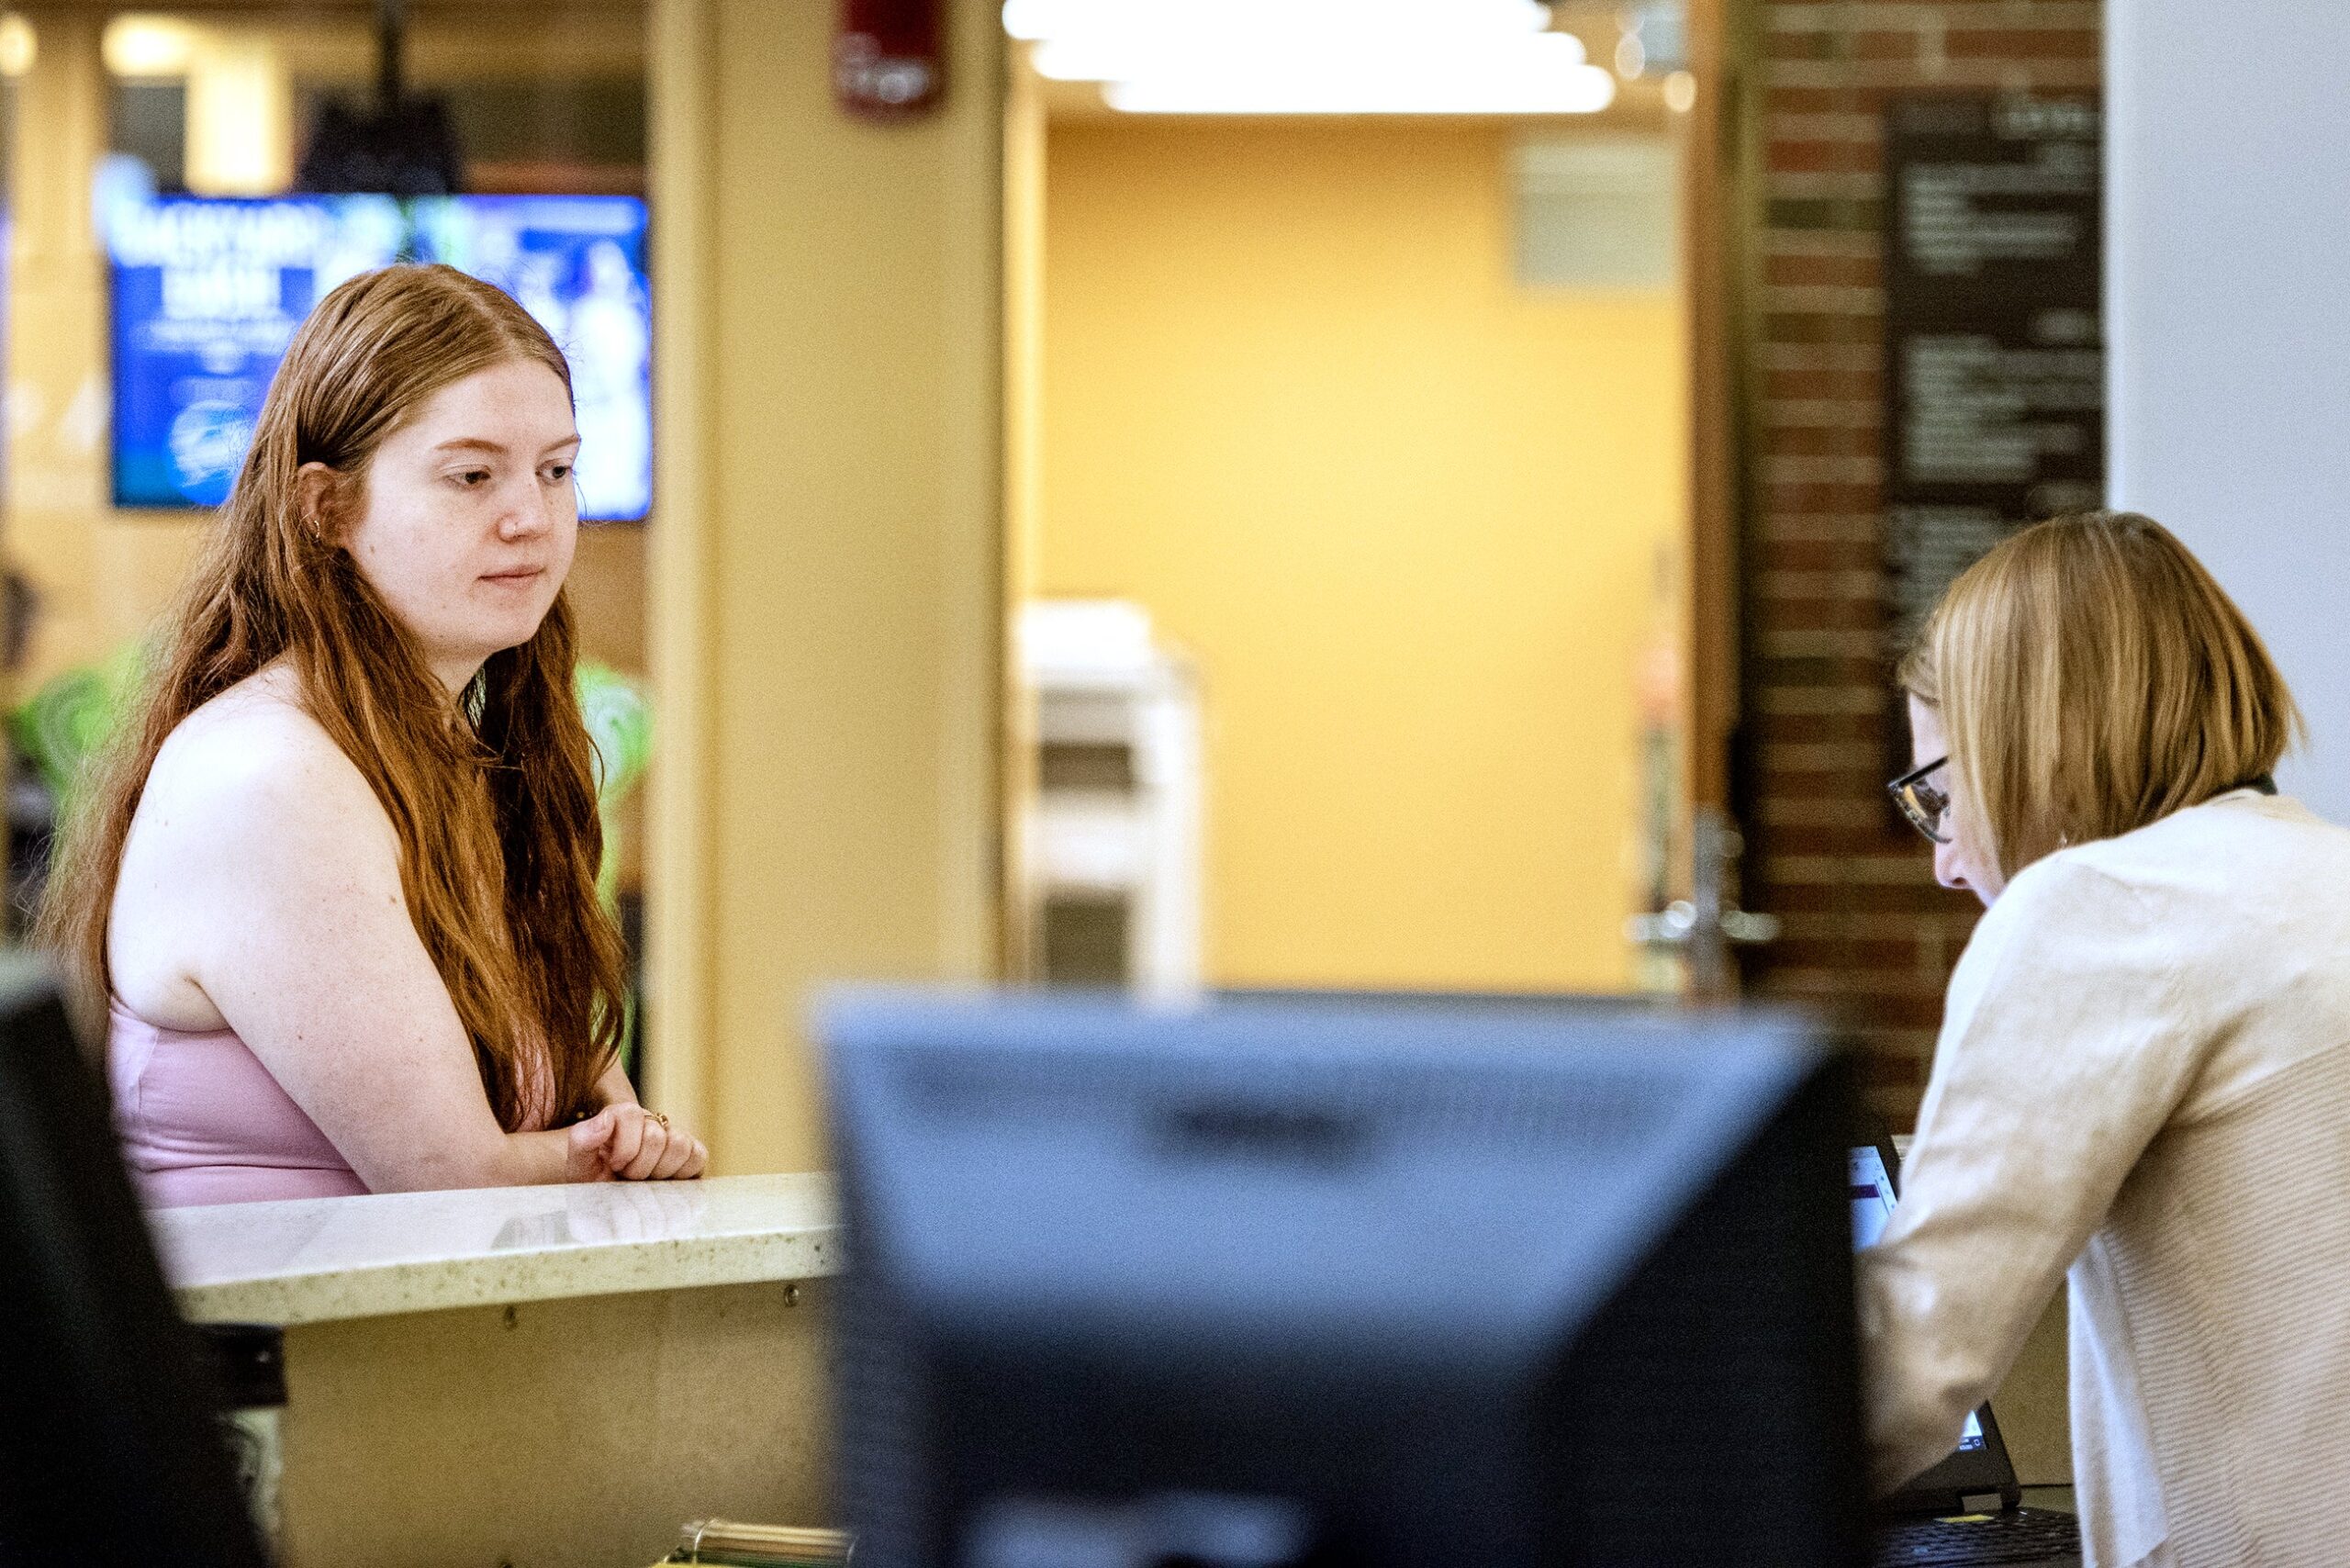 A student stands at a counter to speak to a worker.